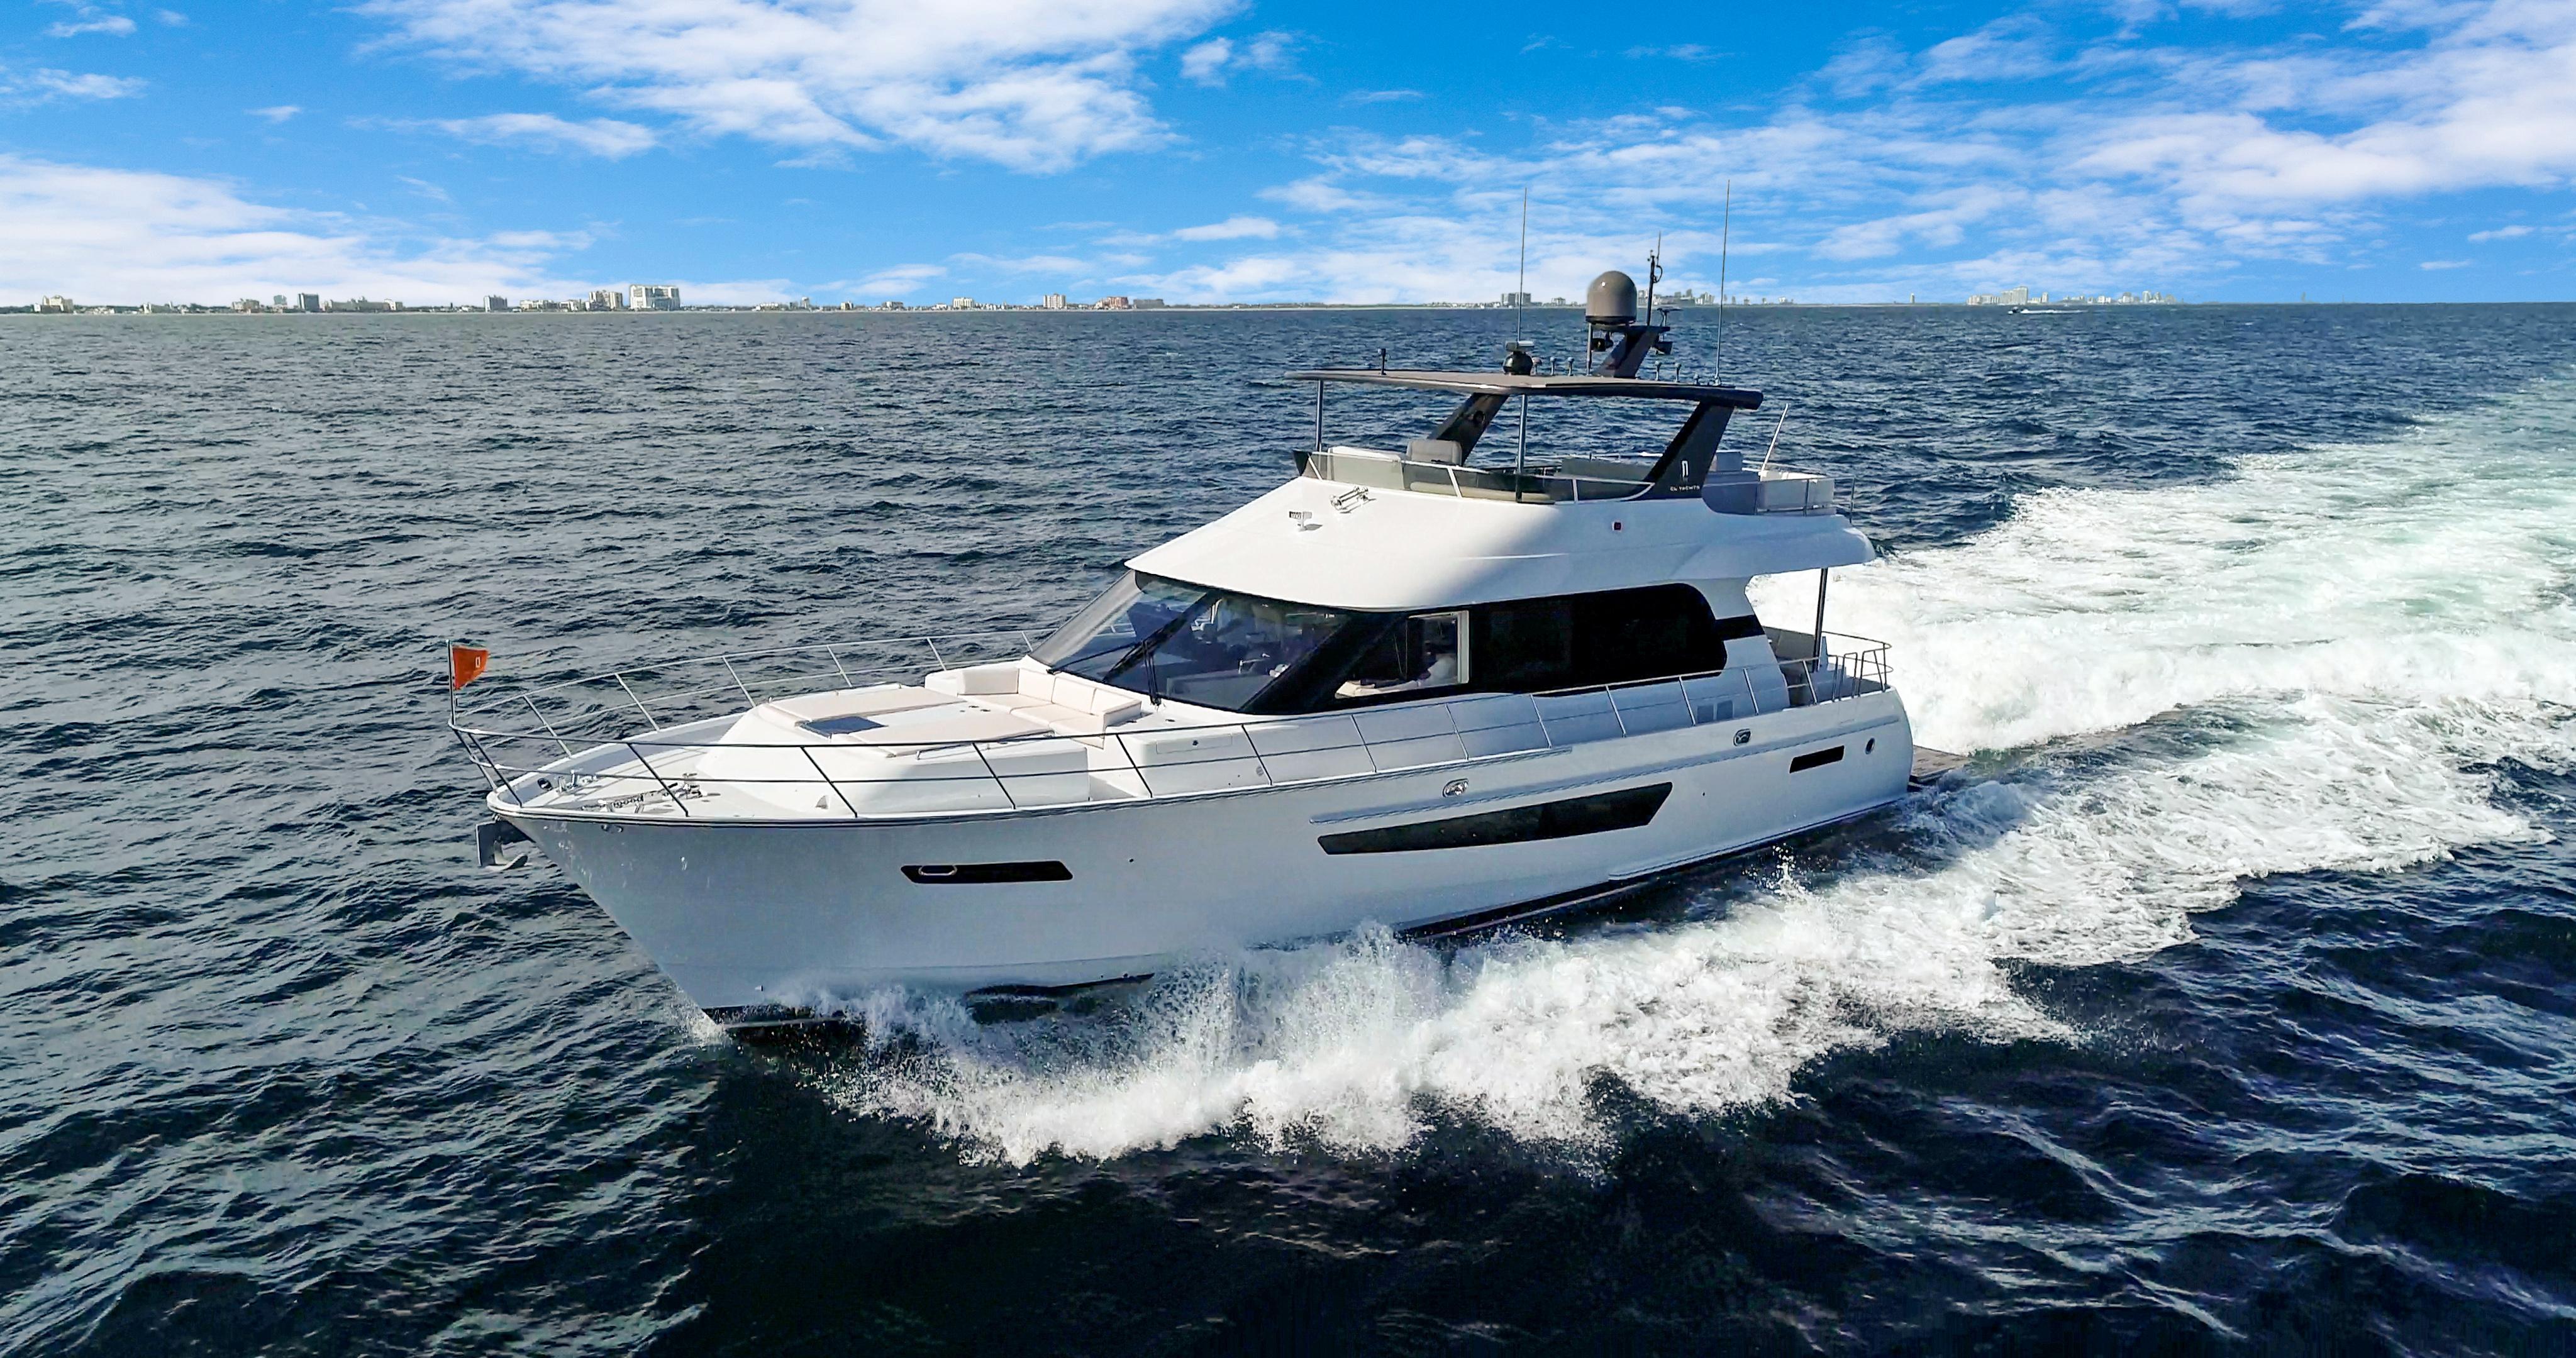 clb65 yacht for sale